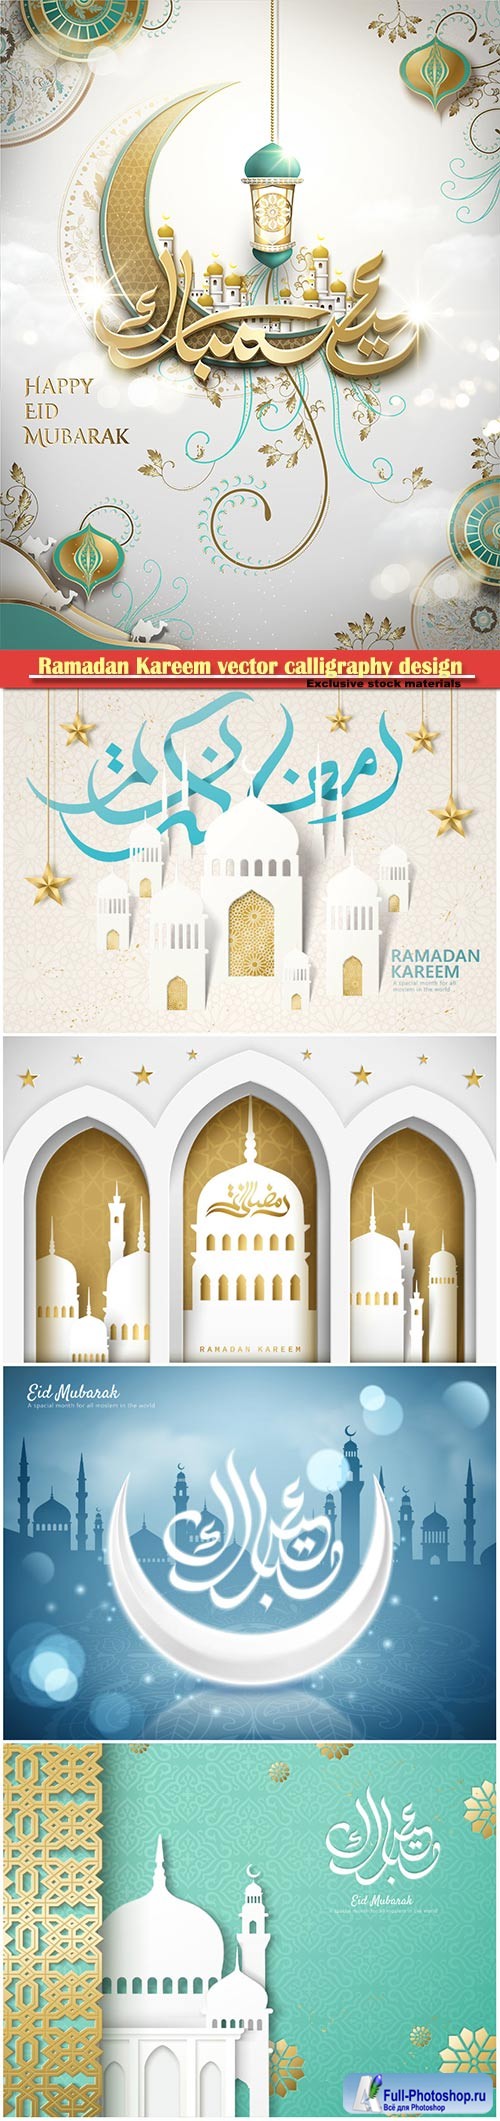 Ramadan Kareem vector calligraphy design with decorative floral pattern,mosque silhouette, crescent and glittering islamic background # 13